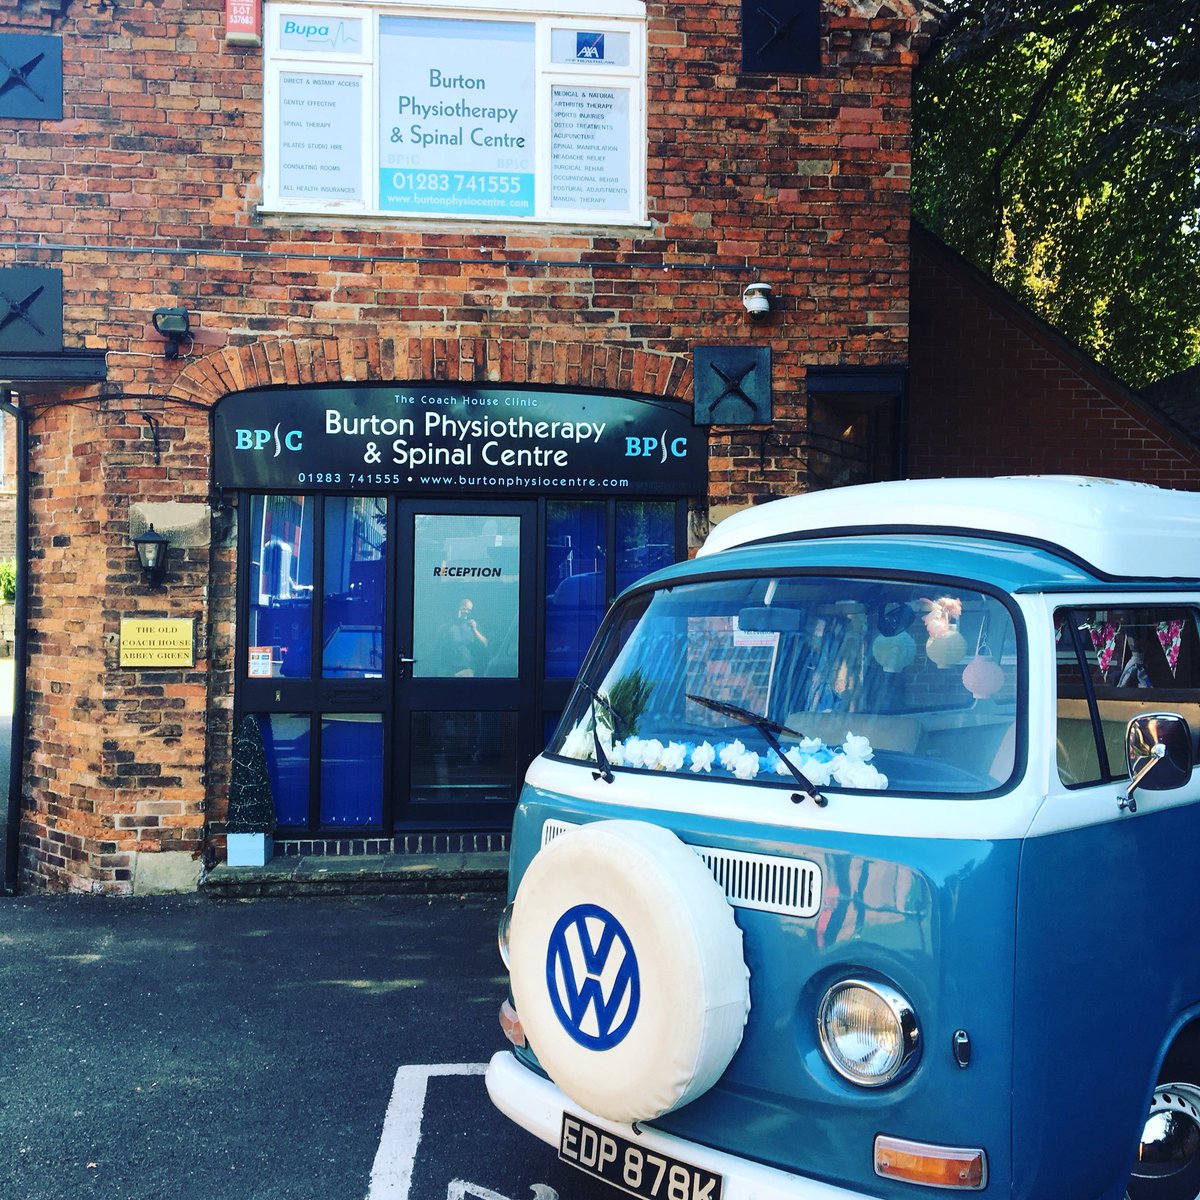 We had a visit from Bertie the campervan today!
#vwbaywindow #burtonphysio #vwcampervan #physiotherapy